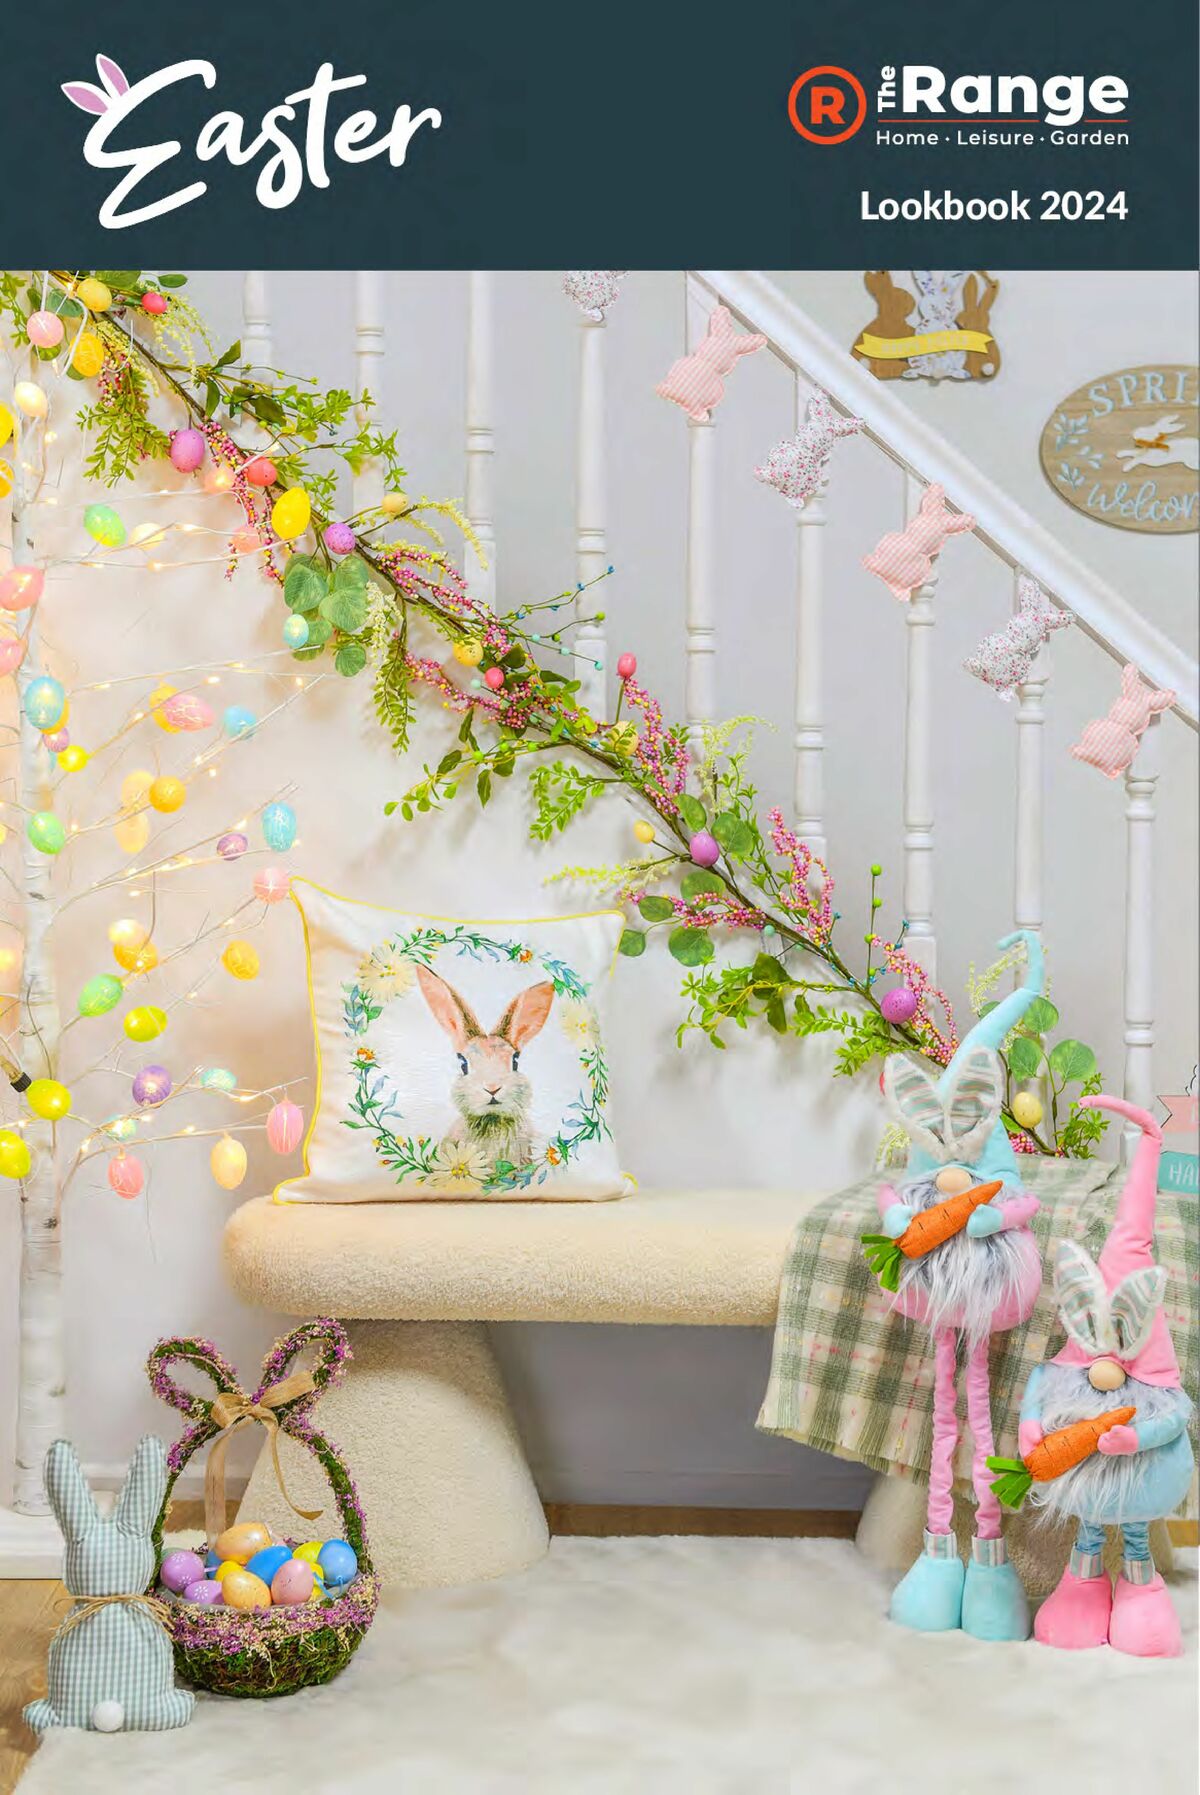 The Range Easter Lookbook Offers from 29 January